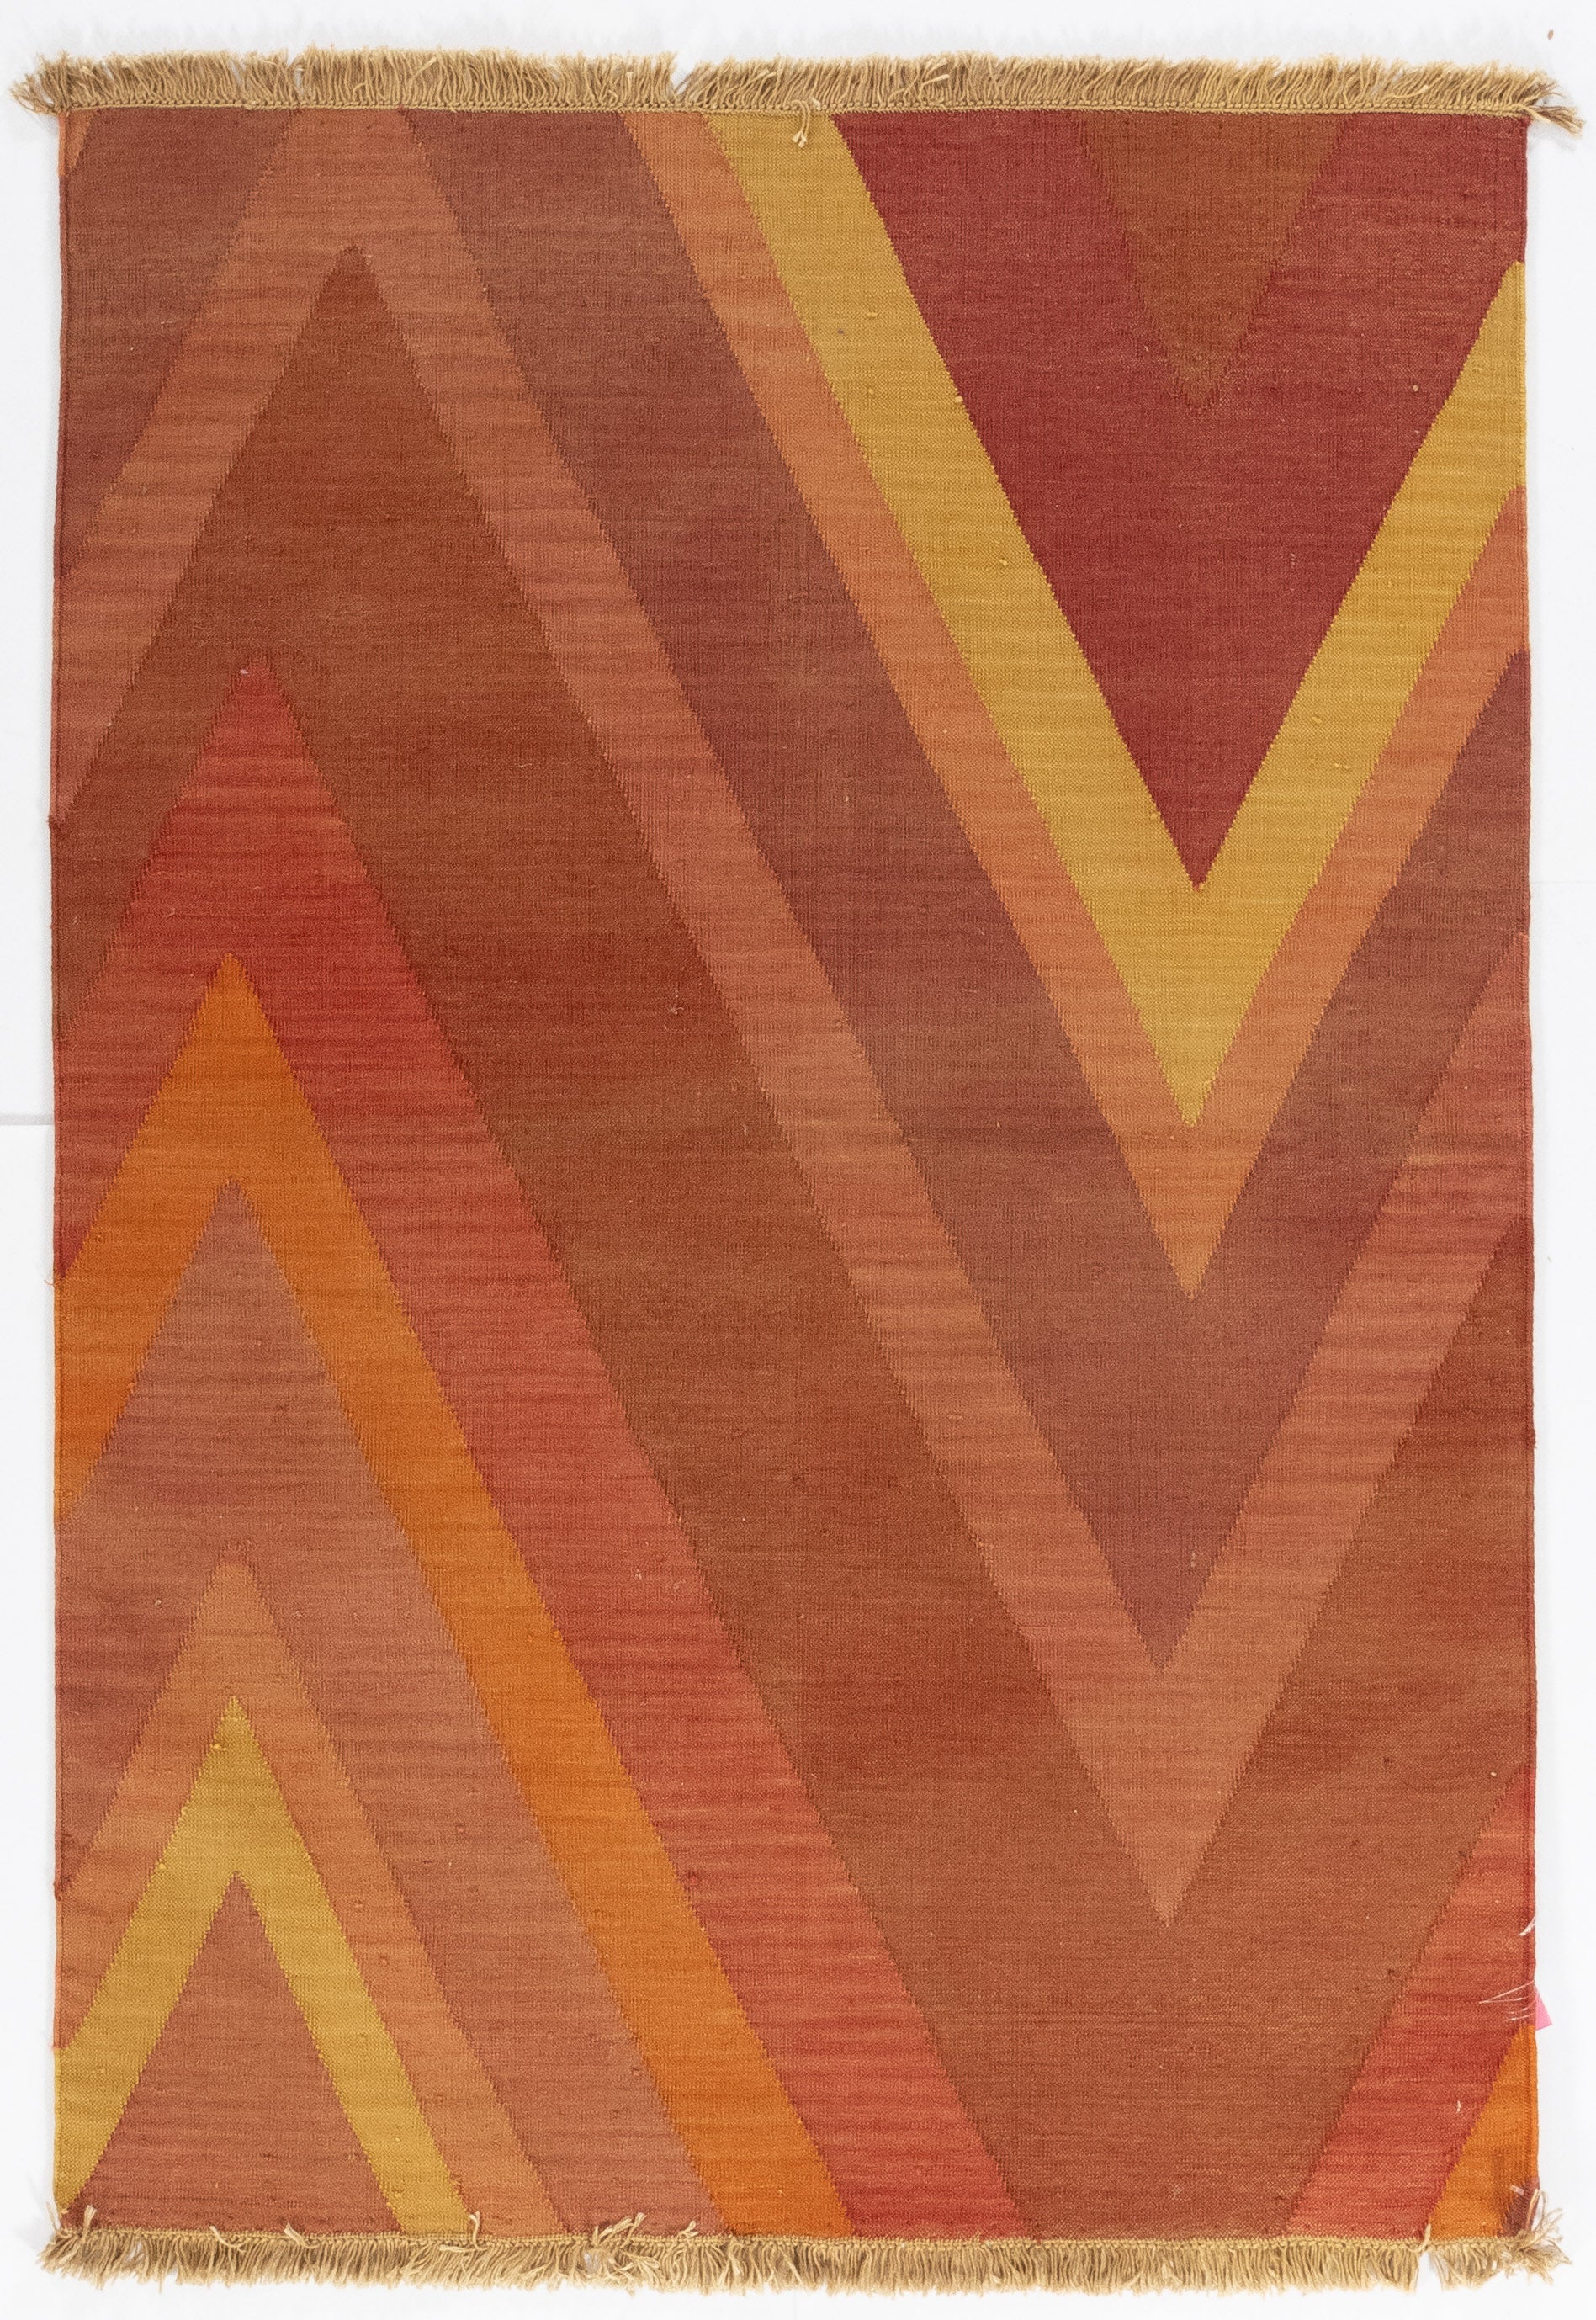 New Indian Contemporary Flatweave Rug <br> 3'4 x 4'10